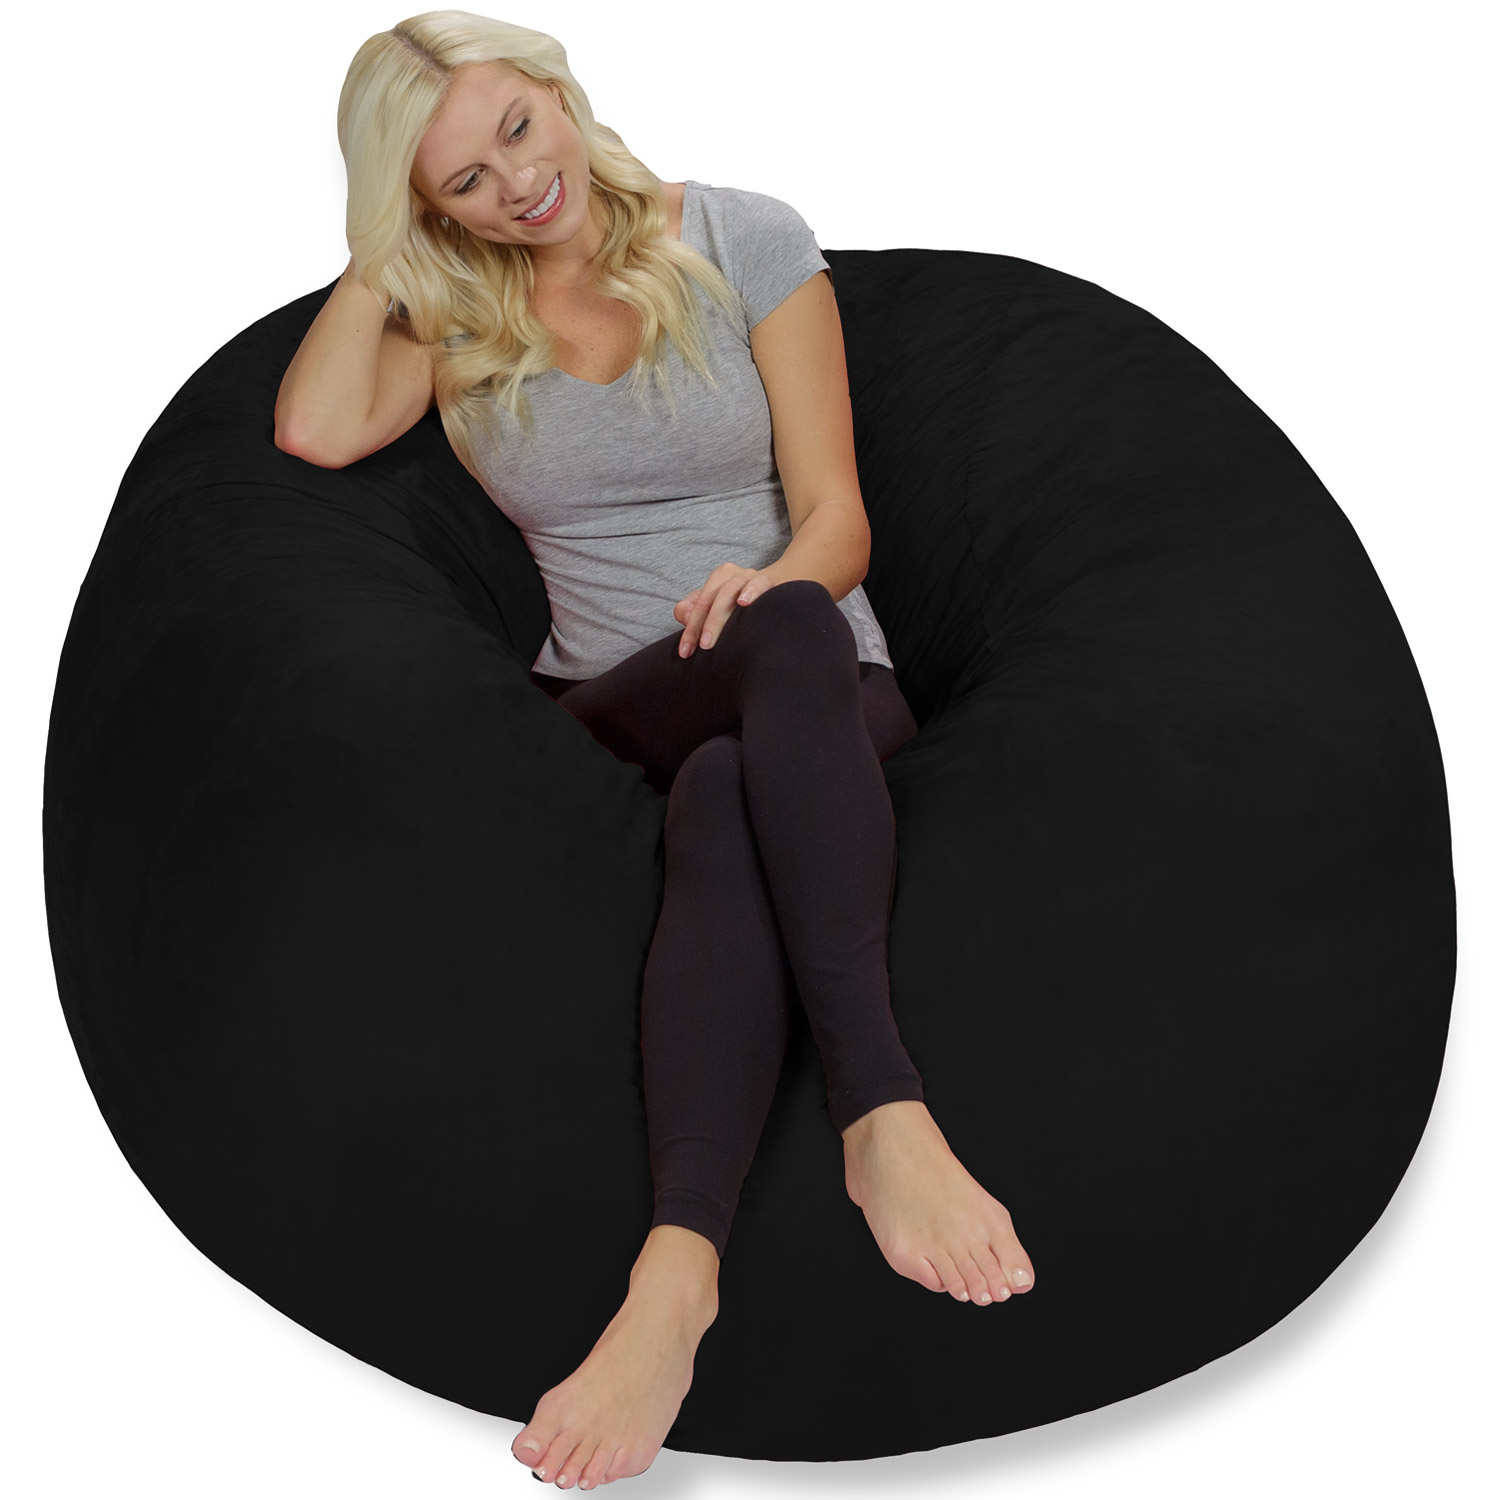 Chill Sack Bean Bag Chair, Memory Foam Lounger with Microsuede Cover, Kids, Adults, 5 ft, Black - image 1 of 5